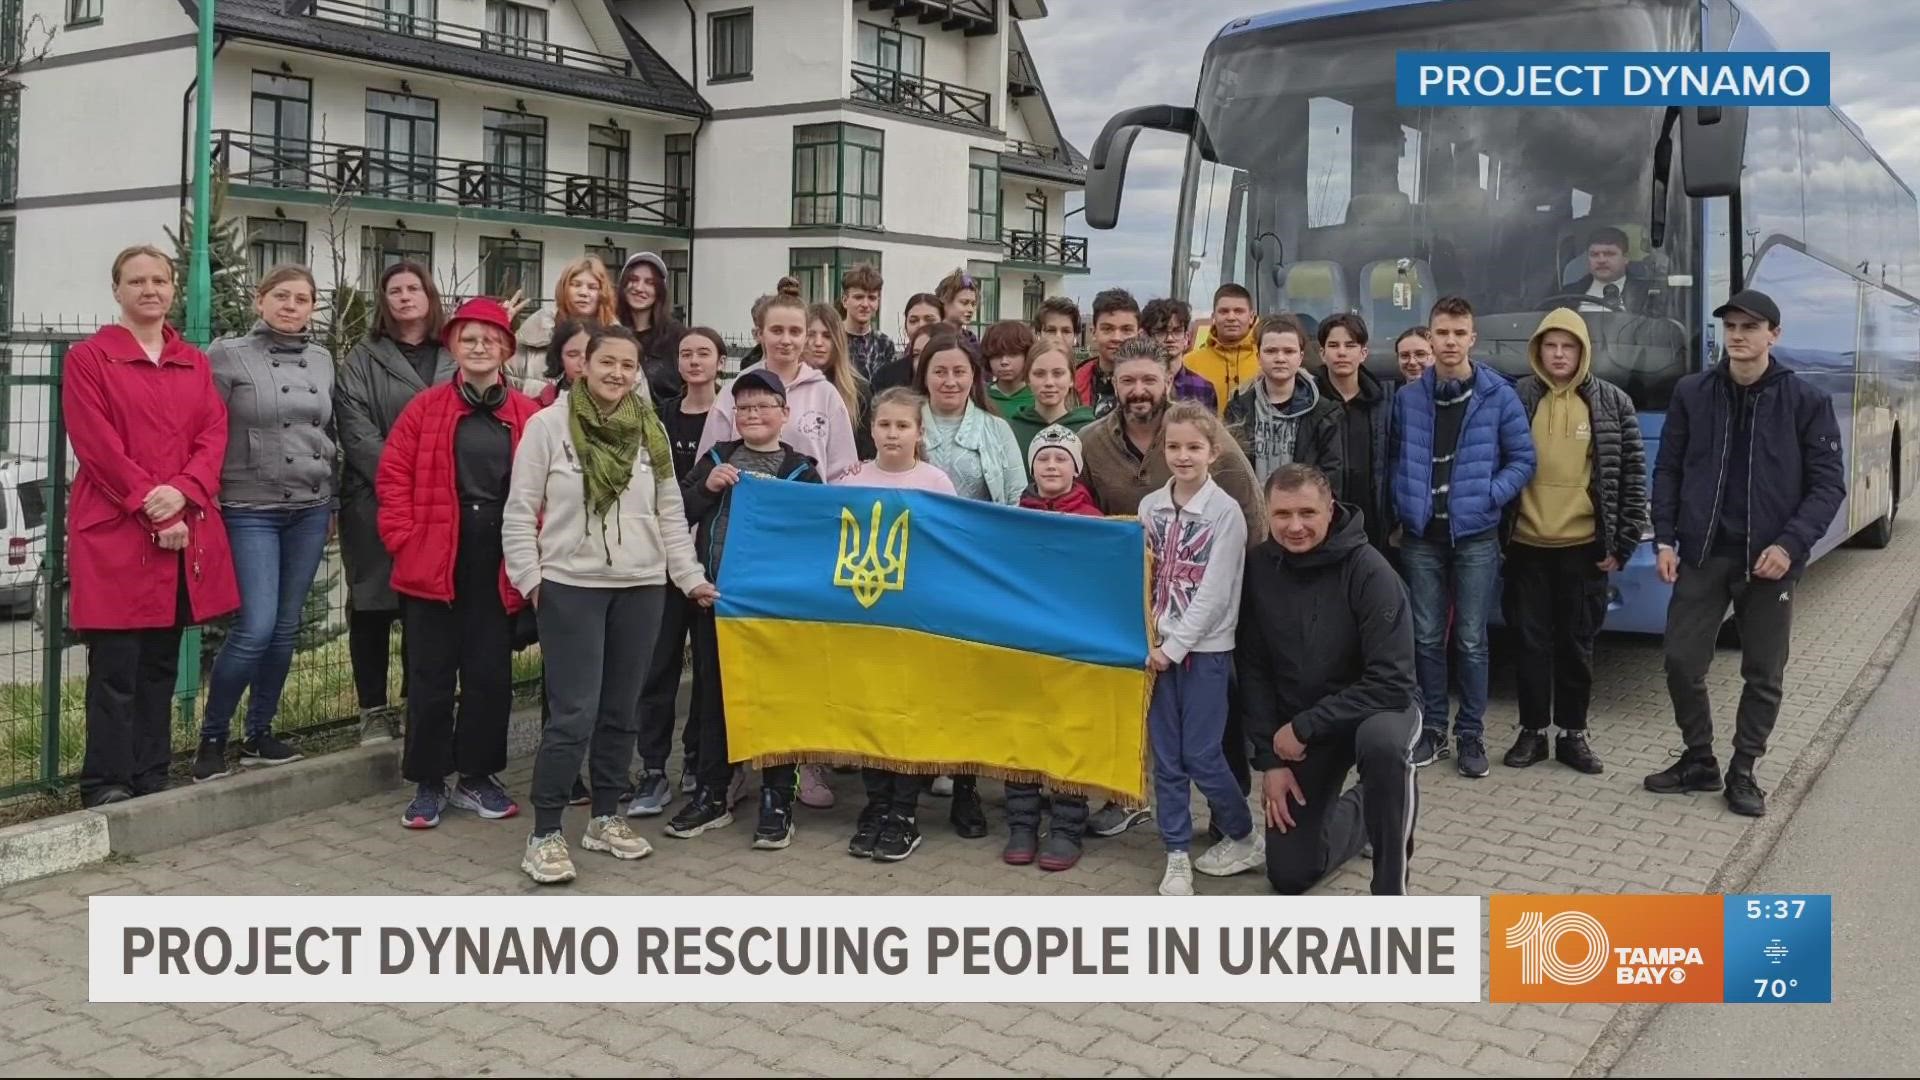 "We’ll continue to stand with Ukraine for as long as it takes," Project DYNAMO founder Bryan Stern said.